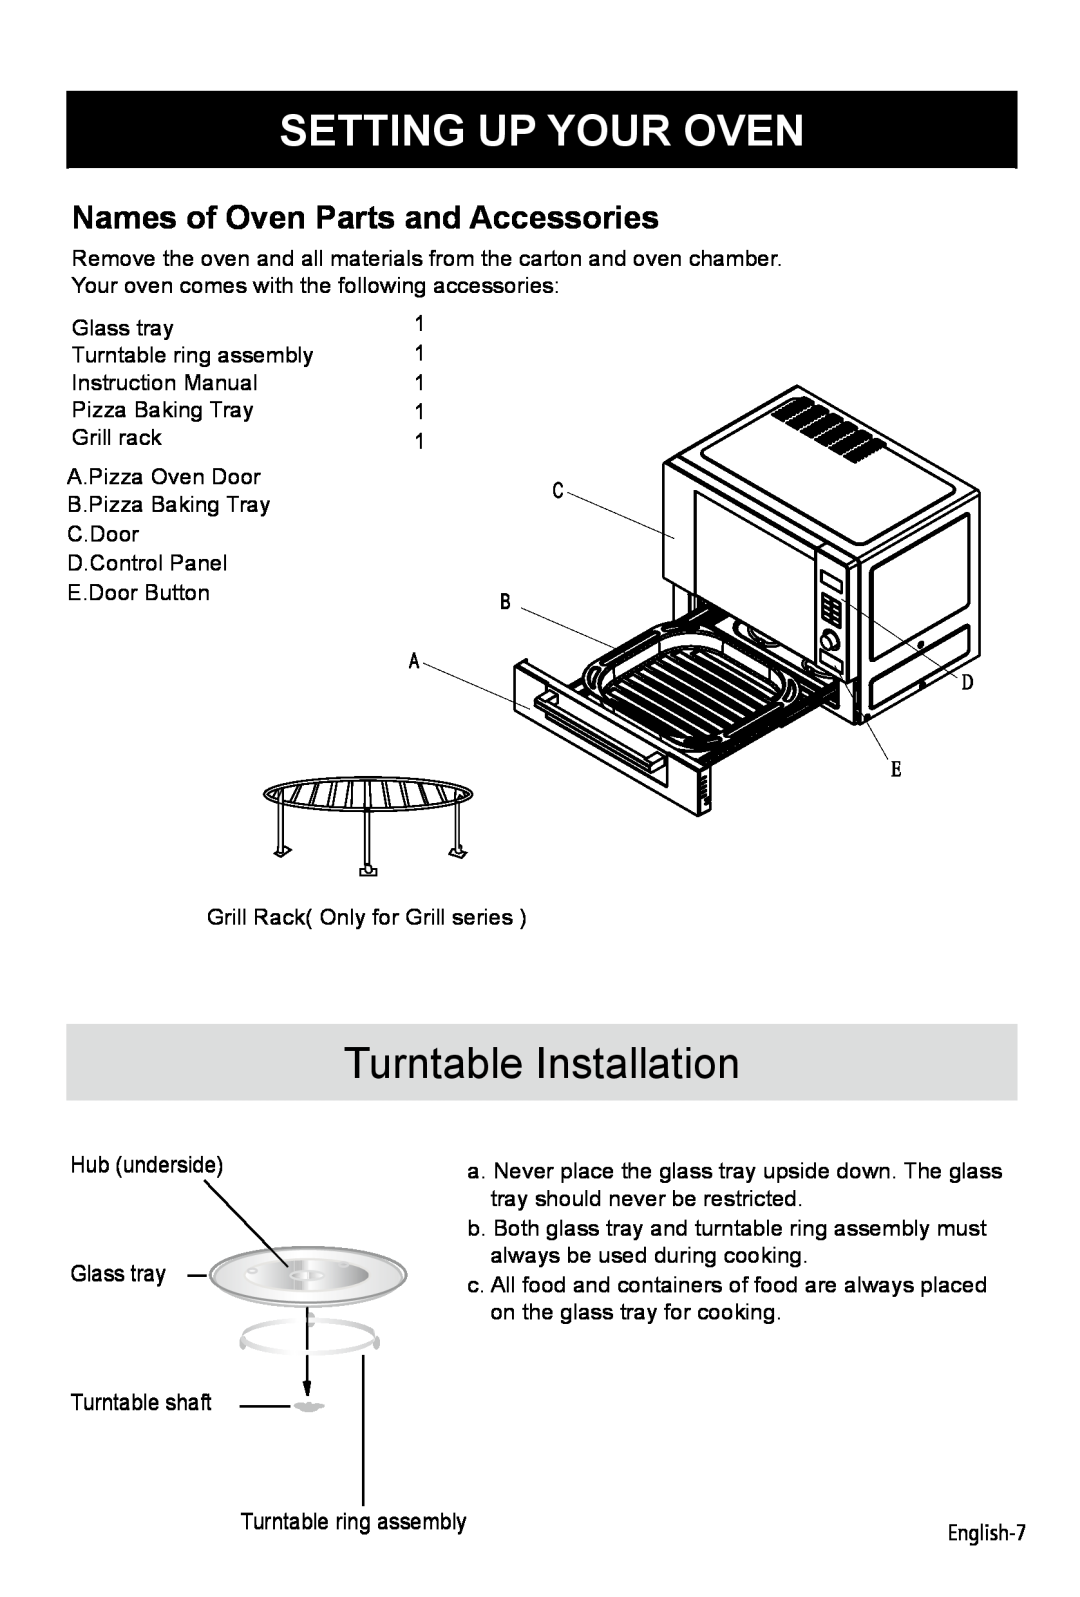 West Bend NJ 07054 instruction manual Setting Up Your Oven, Turntable Installation, Names of Oven Parts and Accessories 